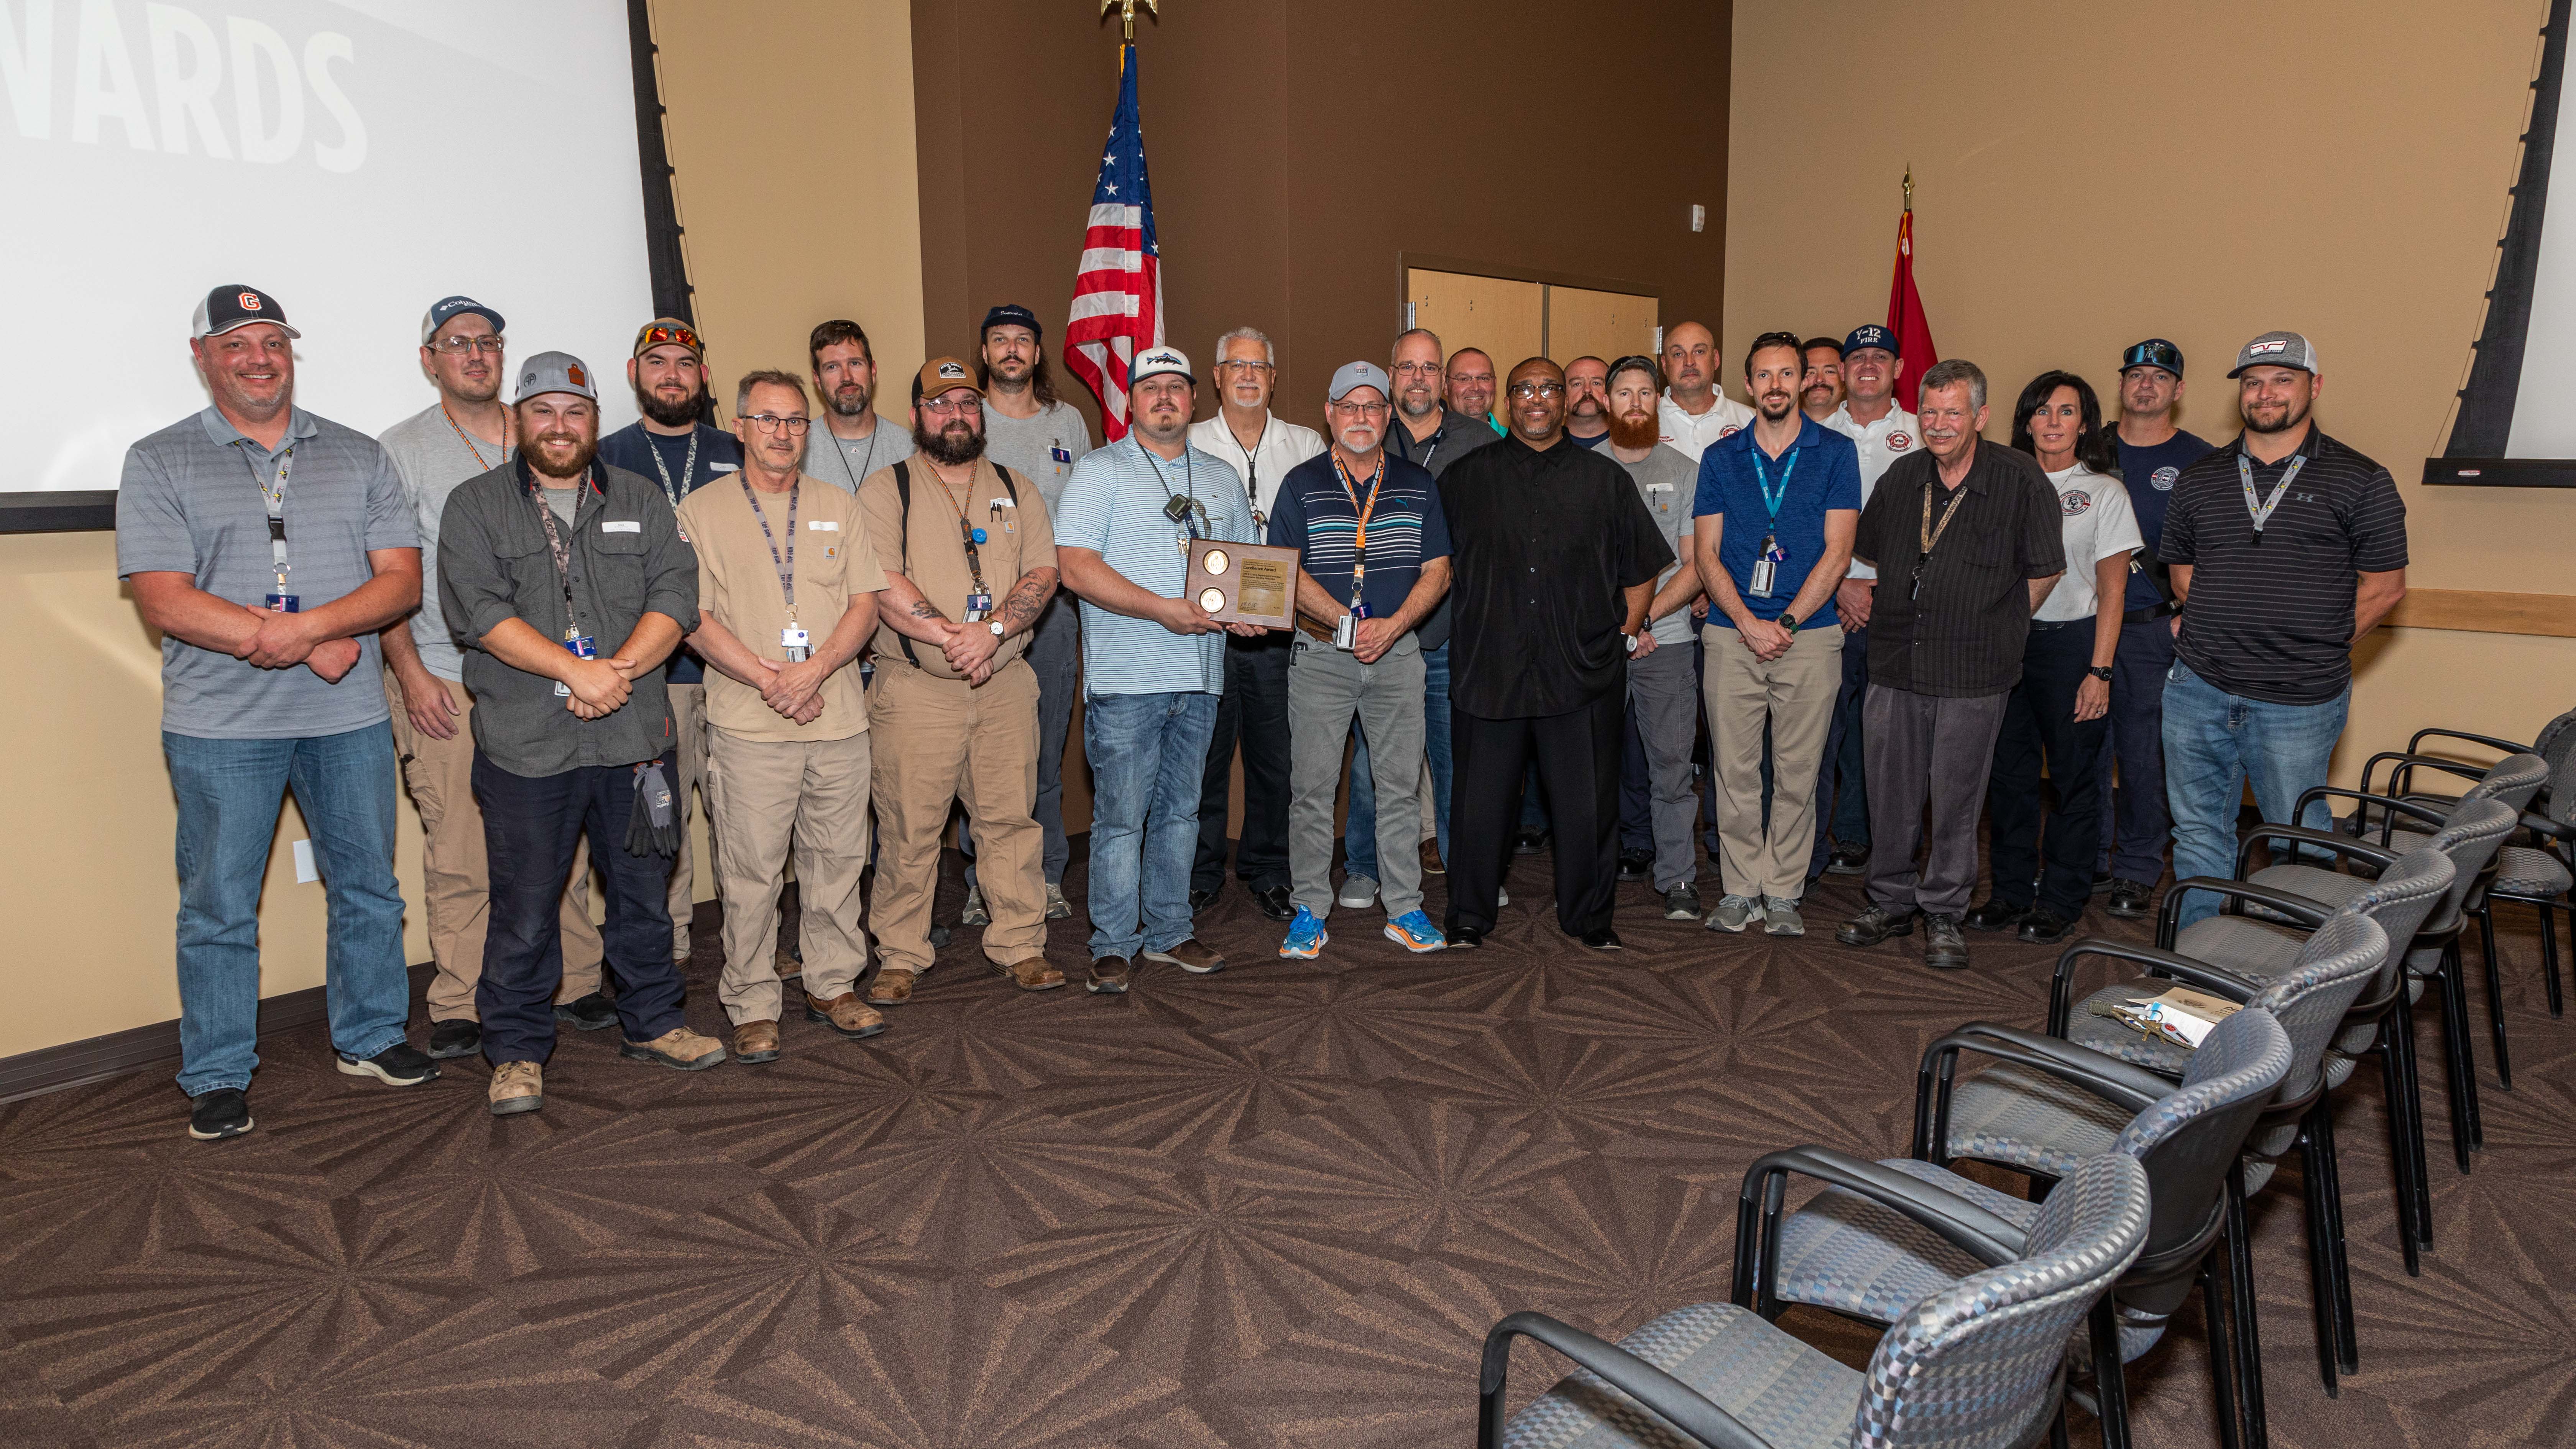 Improving fire systems maintenance and operations by reducing the corrective maintenance backlog and establishing a routine prioritization and scheduling program earned this team an Award of Excellence. 